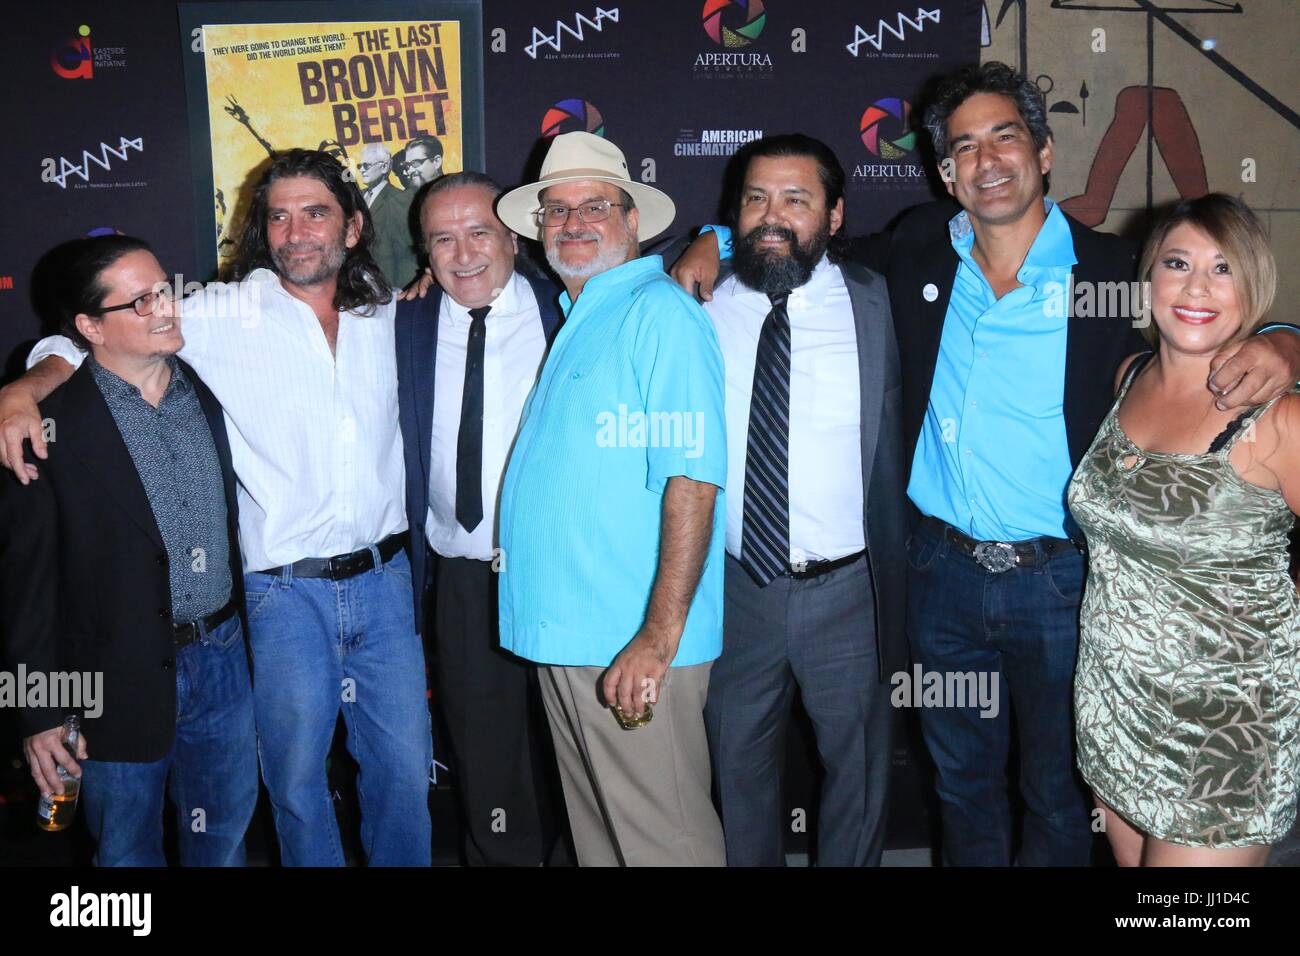 Hollywood Screening of 'The Last Brown Beret' at the Egyptian Theatre on Hollywood Boulevard in Los Angeles, California.  Featuring: Christopher Long, David Castro, Del Zamora, Daniel E. Mora, Randy Vasquez Where: Los Angeles, California, United States When: 14 Jun 2017 Credit: WENN.com Stock Photo